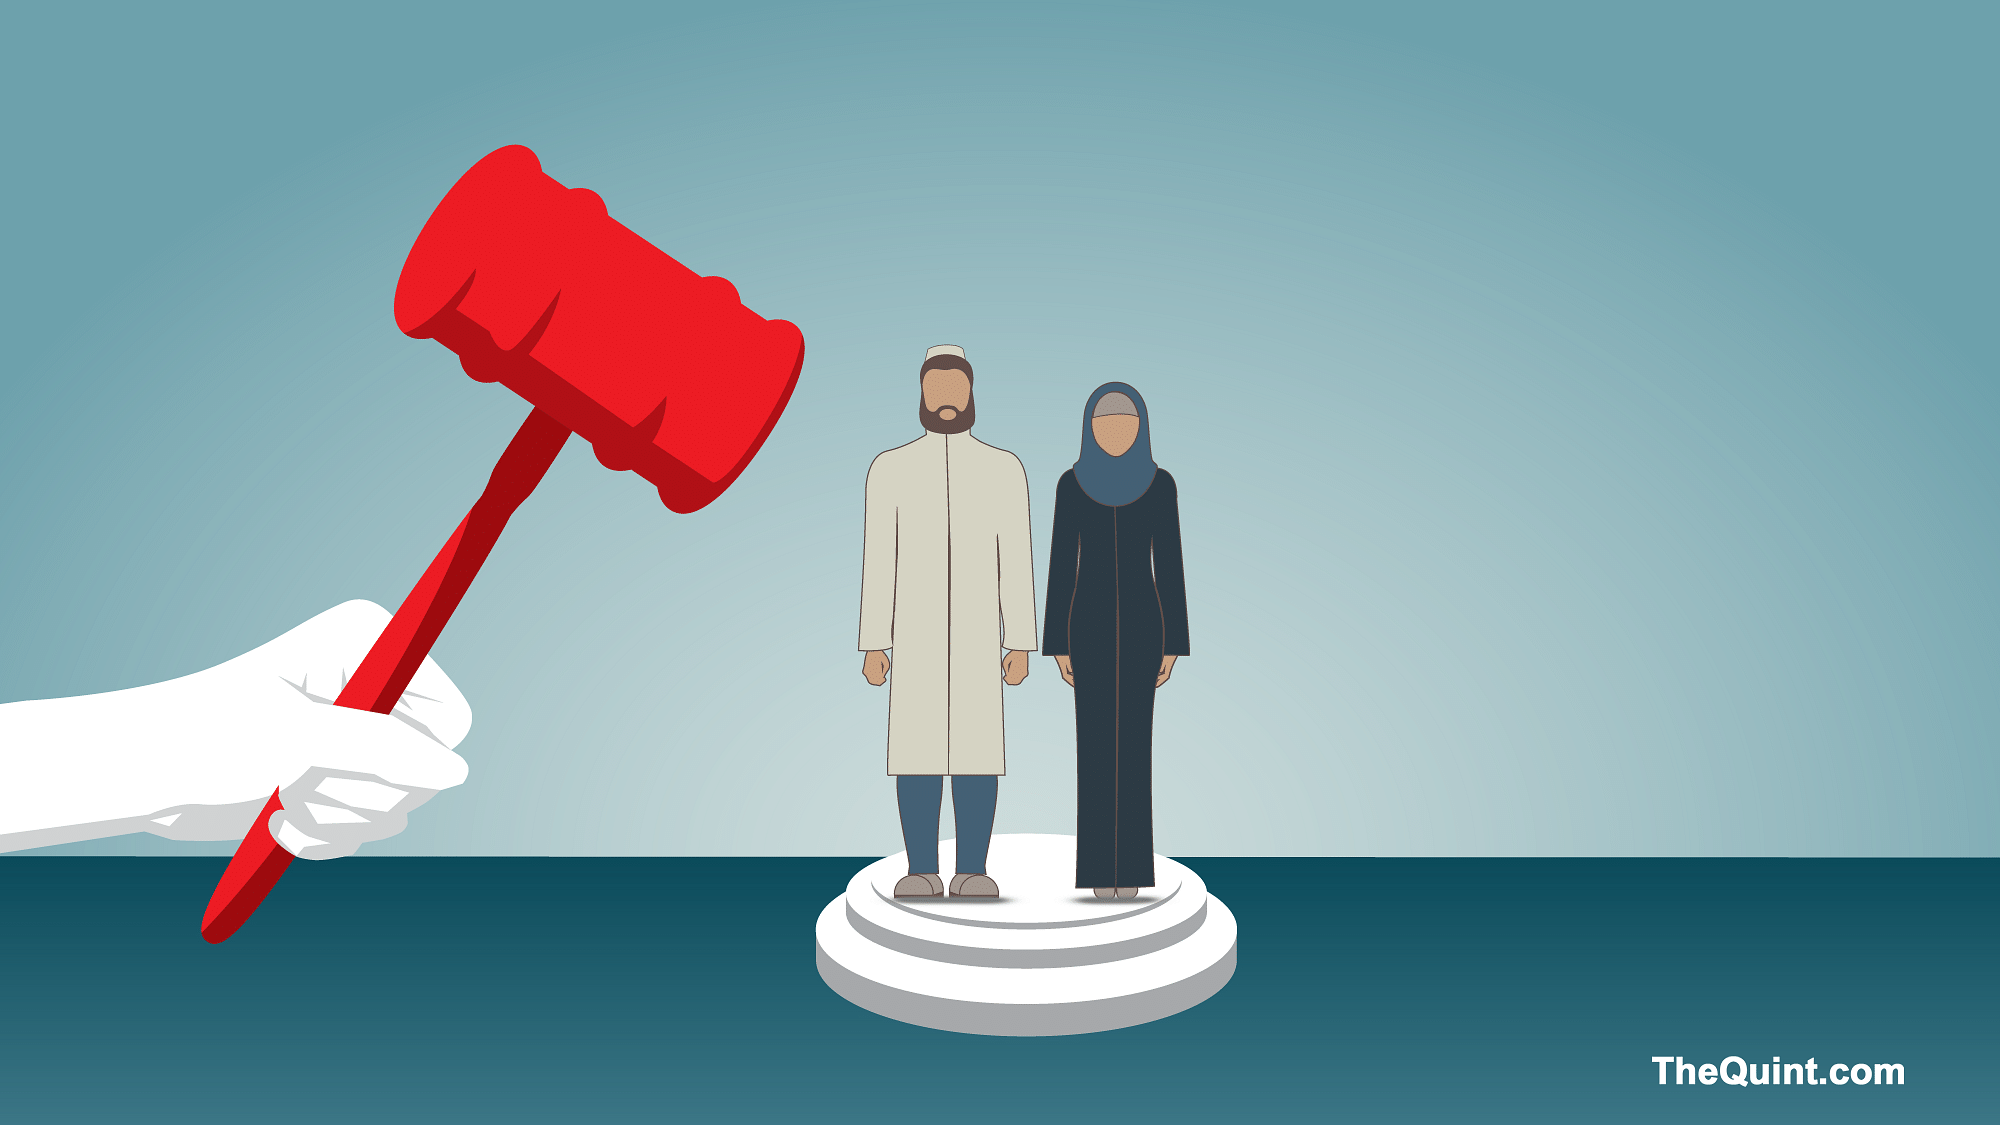 According to Muslim personal law based on an interpretation of the Sharia, a Muslim man can divorce his wife by pronouncing talaq thrice. (Photo: <b>The Quint</b>)